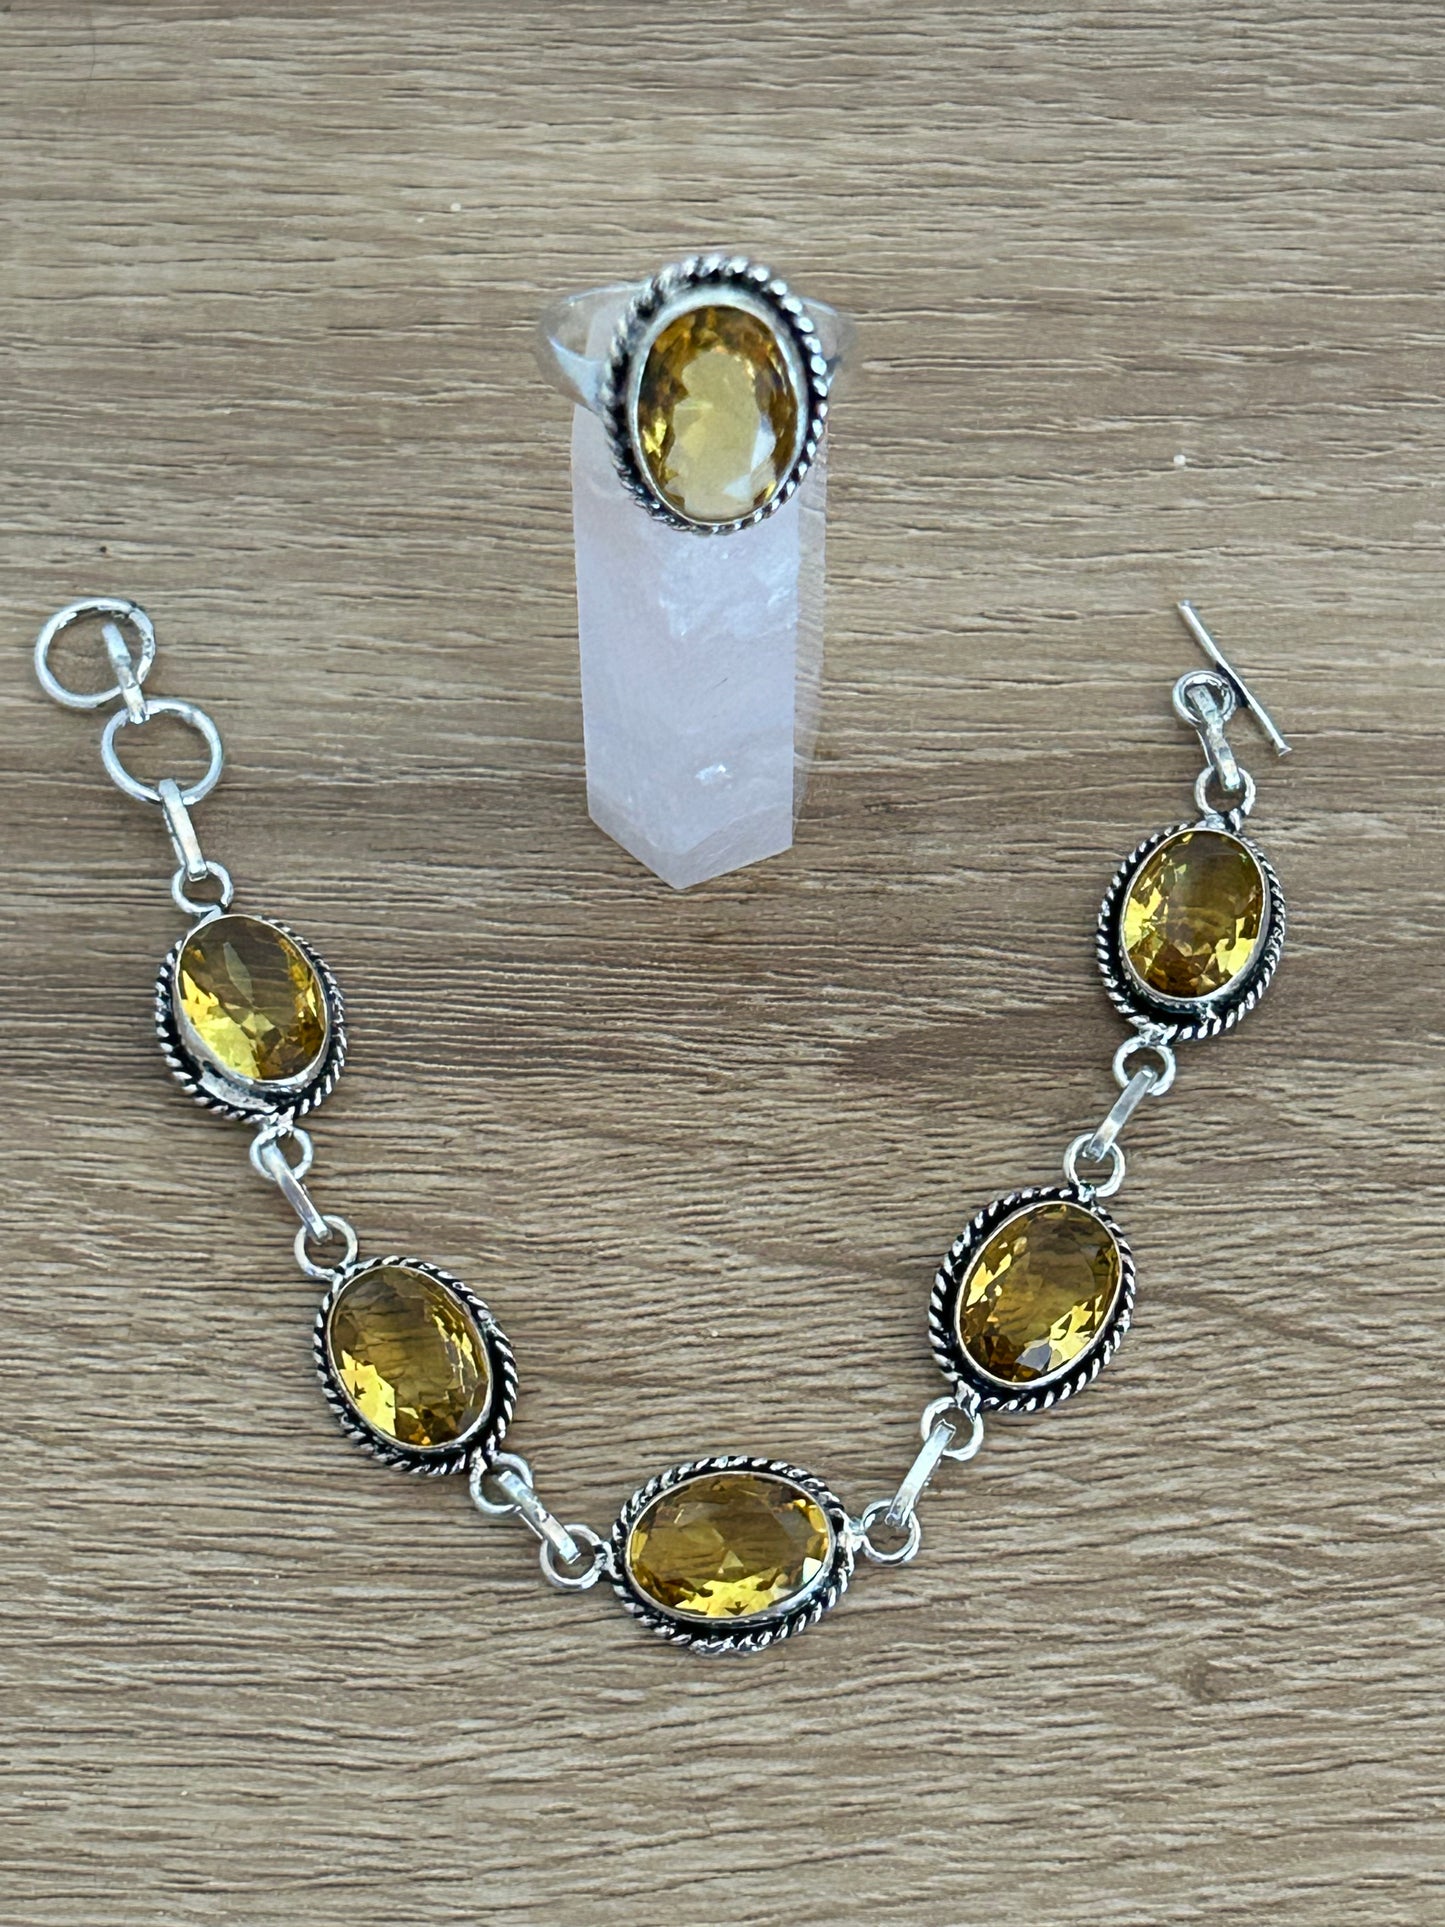 Faceted Citrine and 925 Sterling Silver Bracelet and Ring Set. The bracelet contains 5 large citrine gems and the ring one